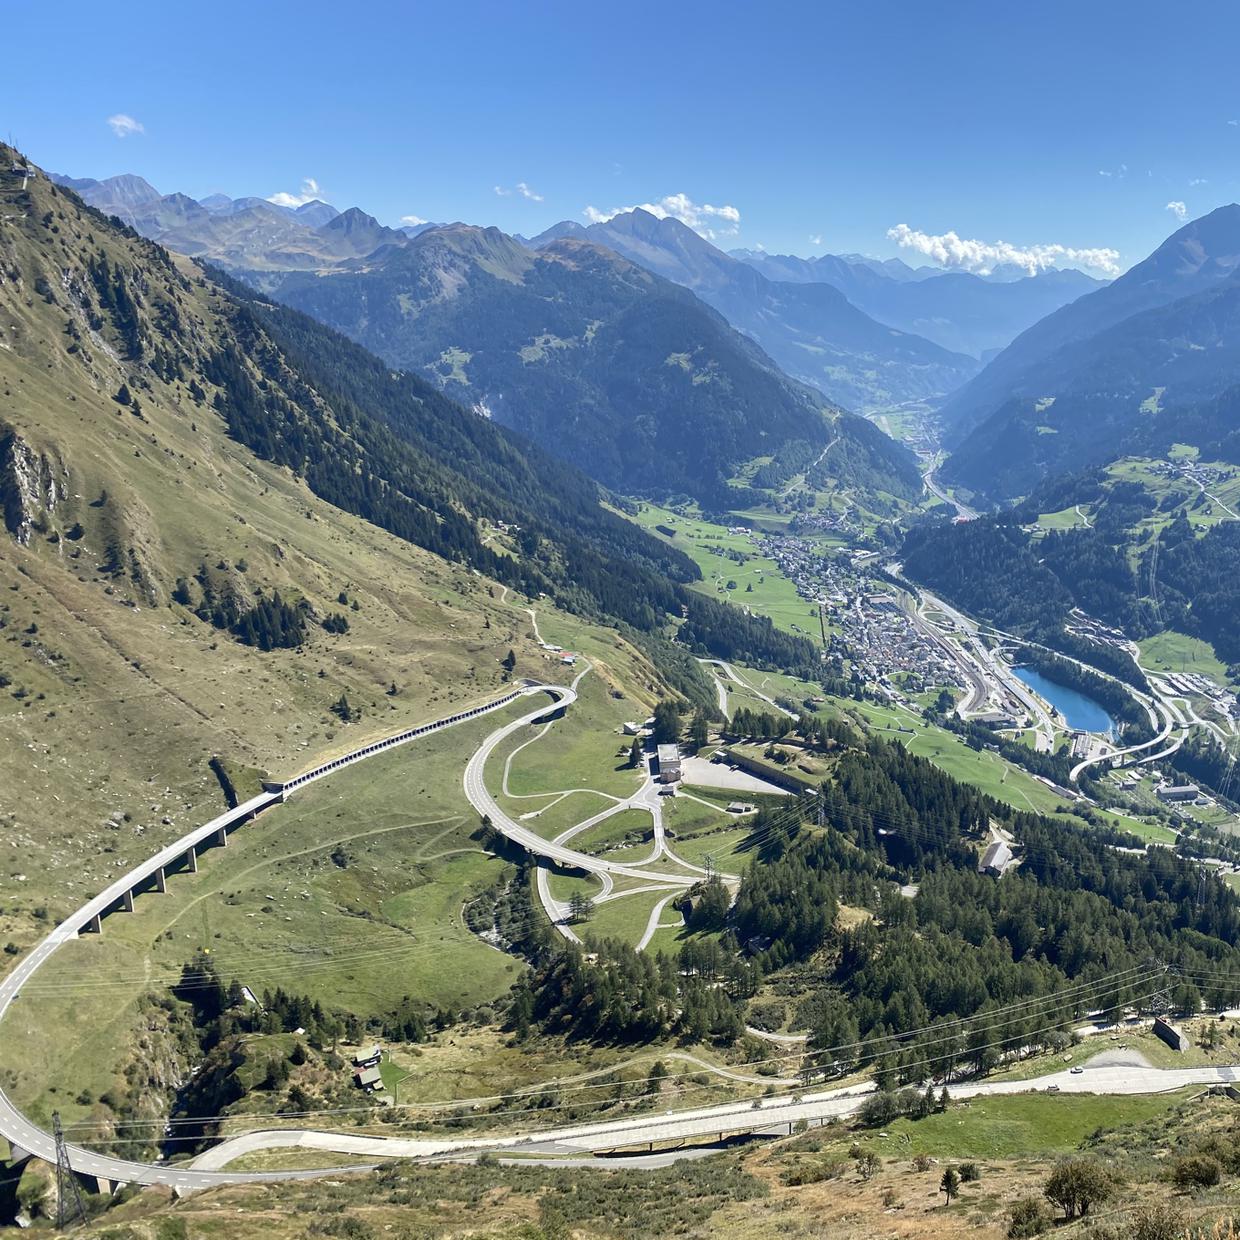 View from the Gotthard pass, looking south towards Ticino.